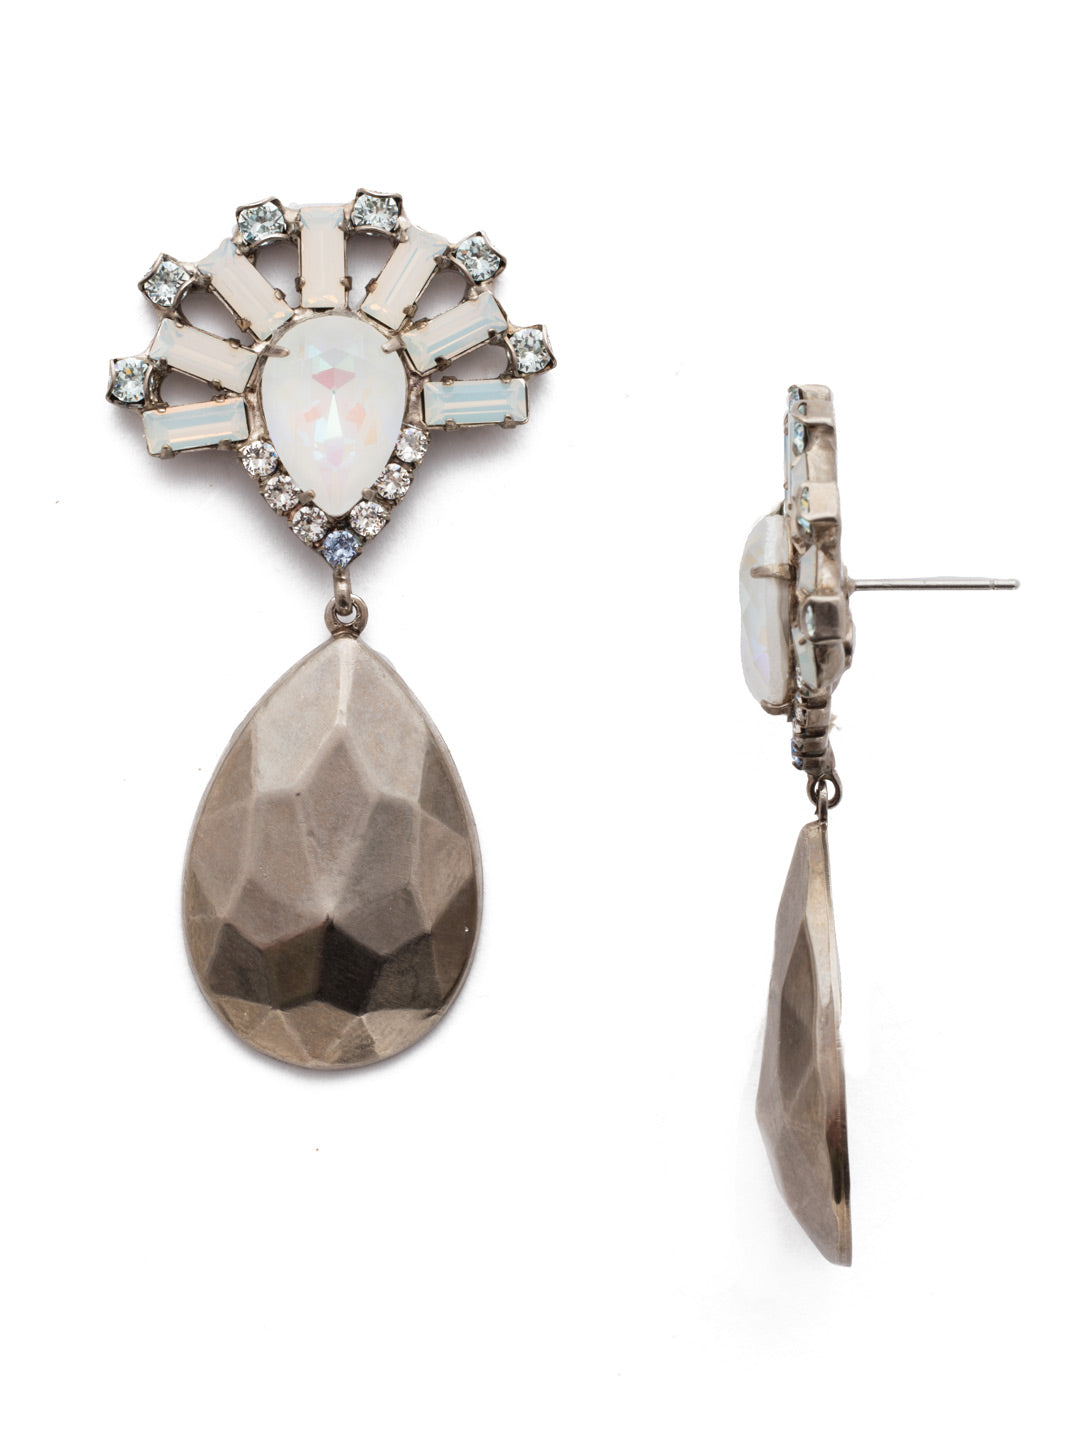 Eira Drop Earring - EEF3ASGLC - <p>A lovely fan array of shimmering stones and crystals surround a single teardrop shaped stone. The earrings dangling metal plate will reflect the looks of awe that will follow wherever you wear these earrings. From Sorrelli's Glacier collection in our Antique Silver-tone finish.</p>